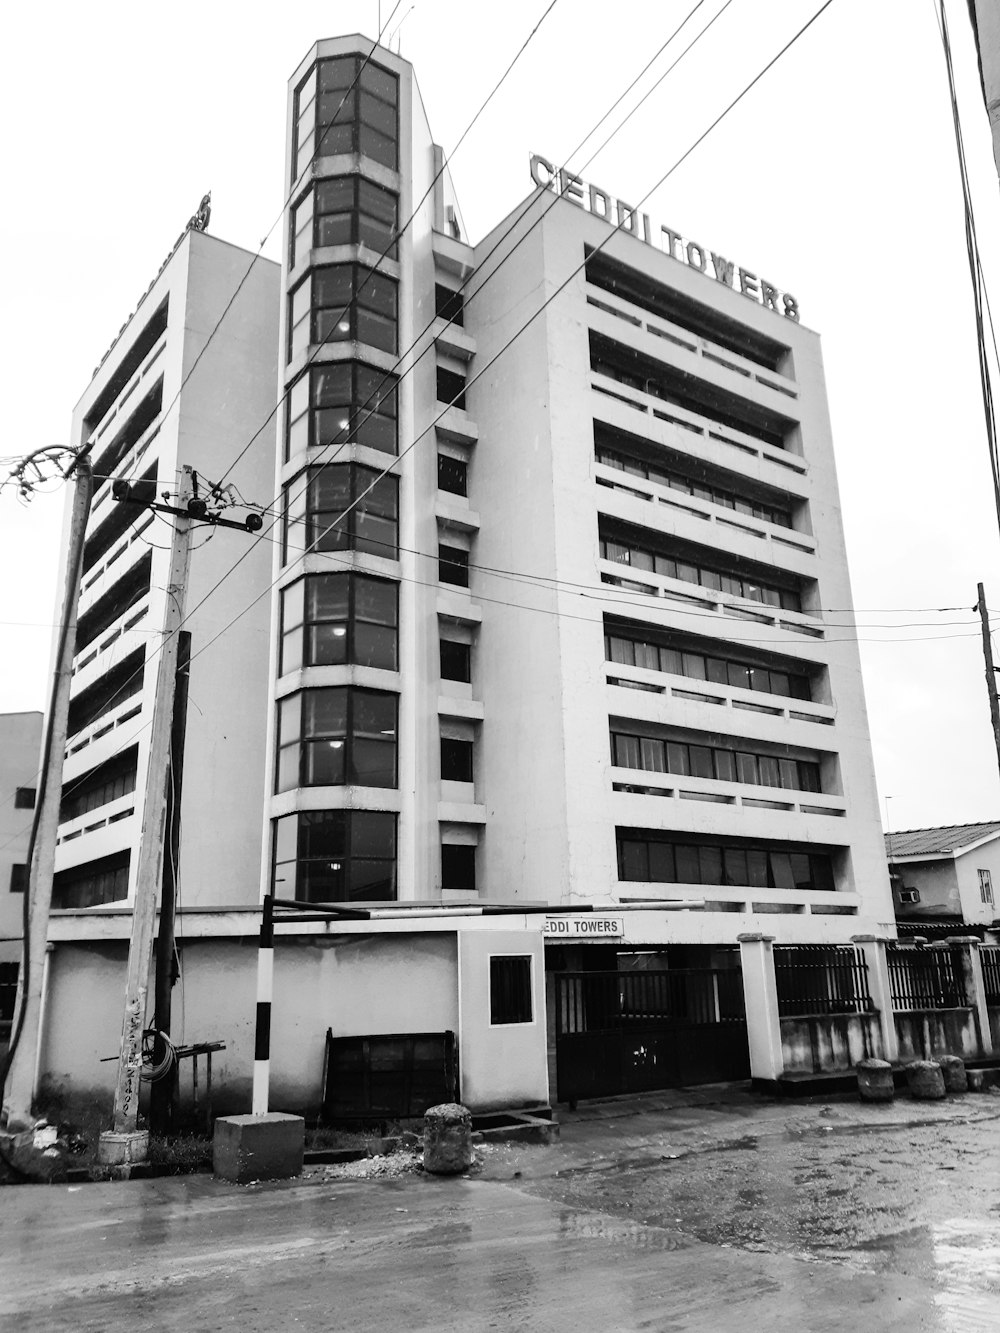 greyscale photo of Ceddi Towers building